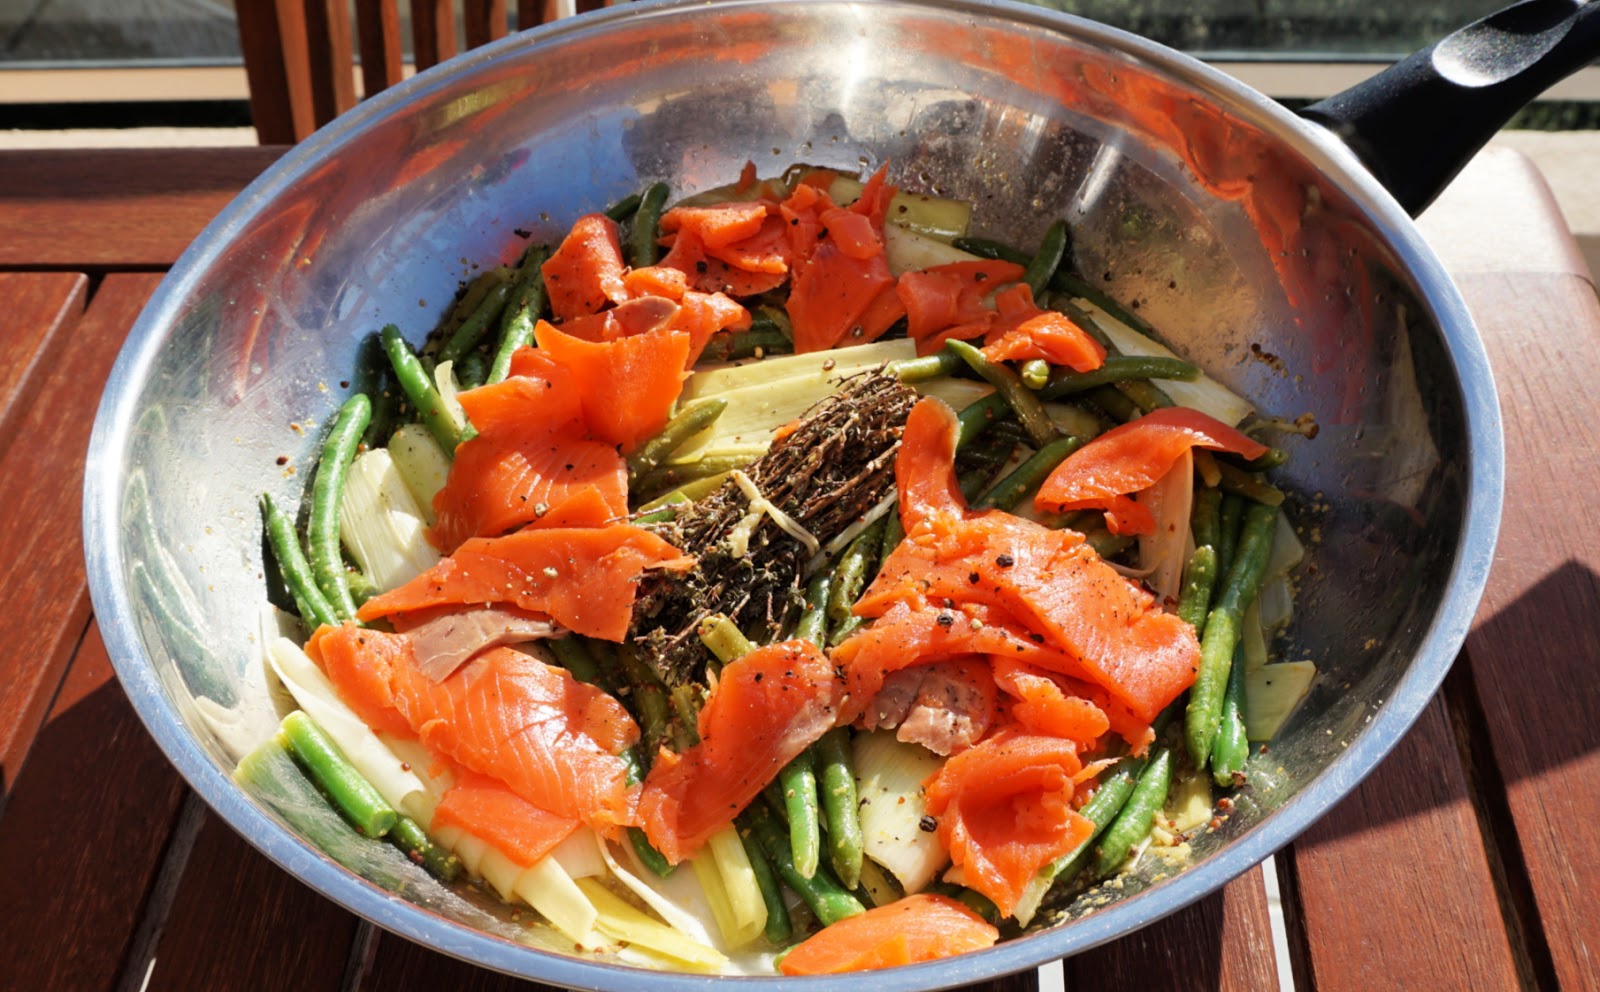 Smoked salmon with leeks and green beans